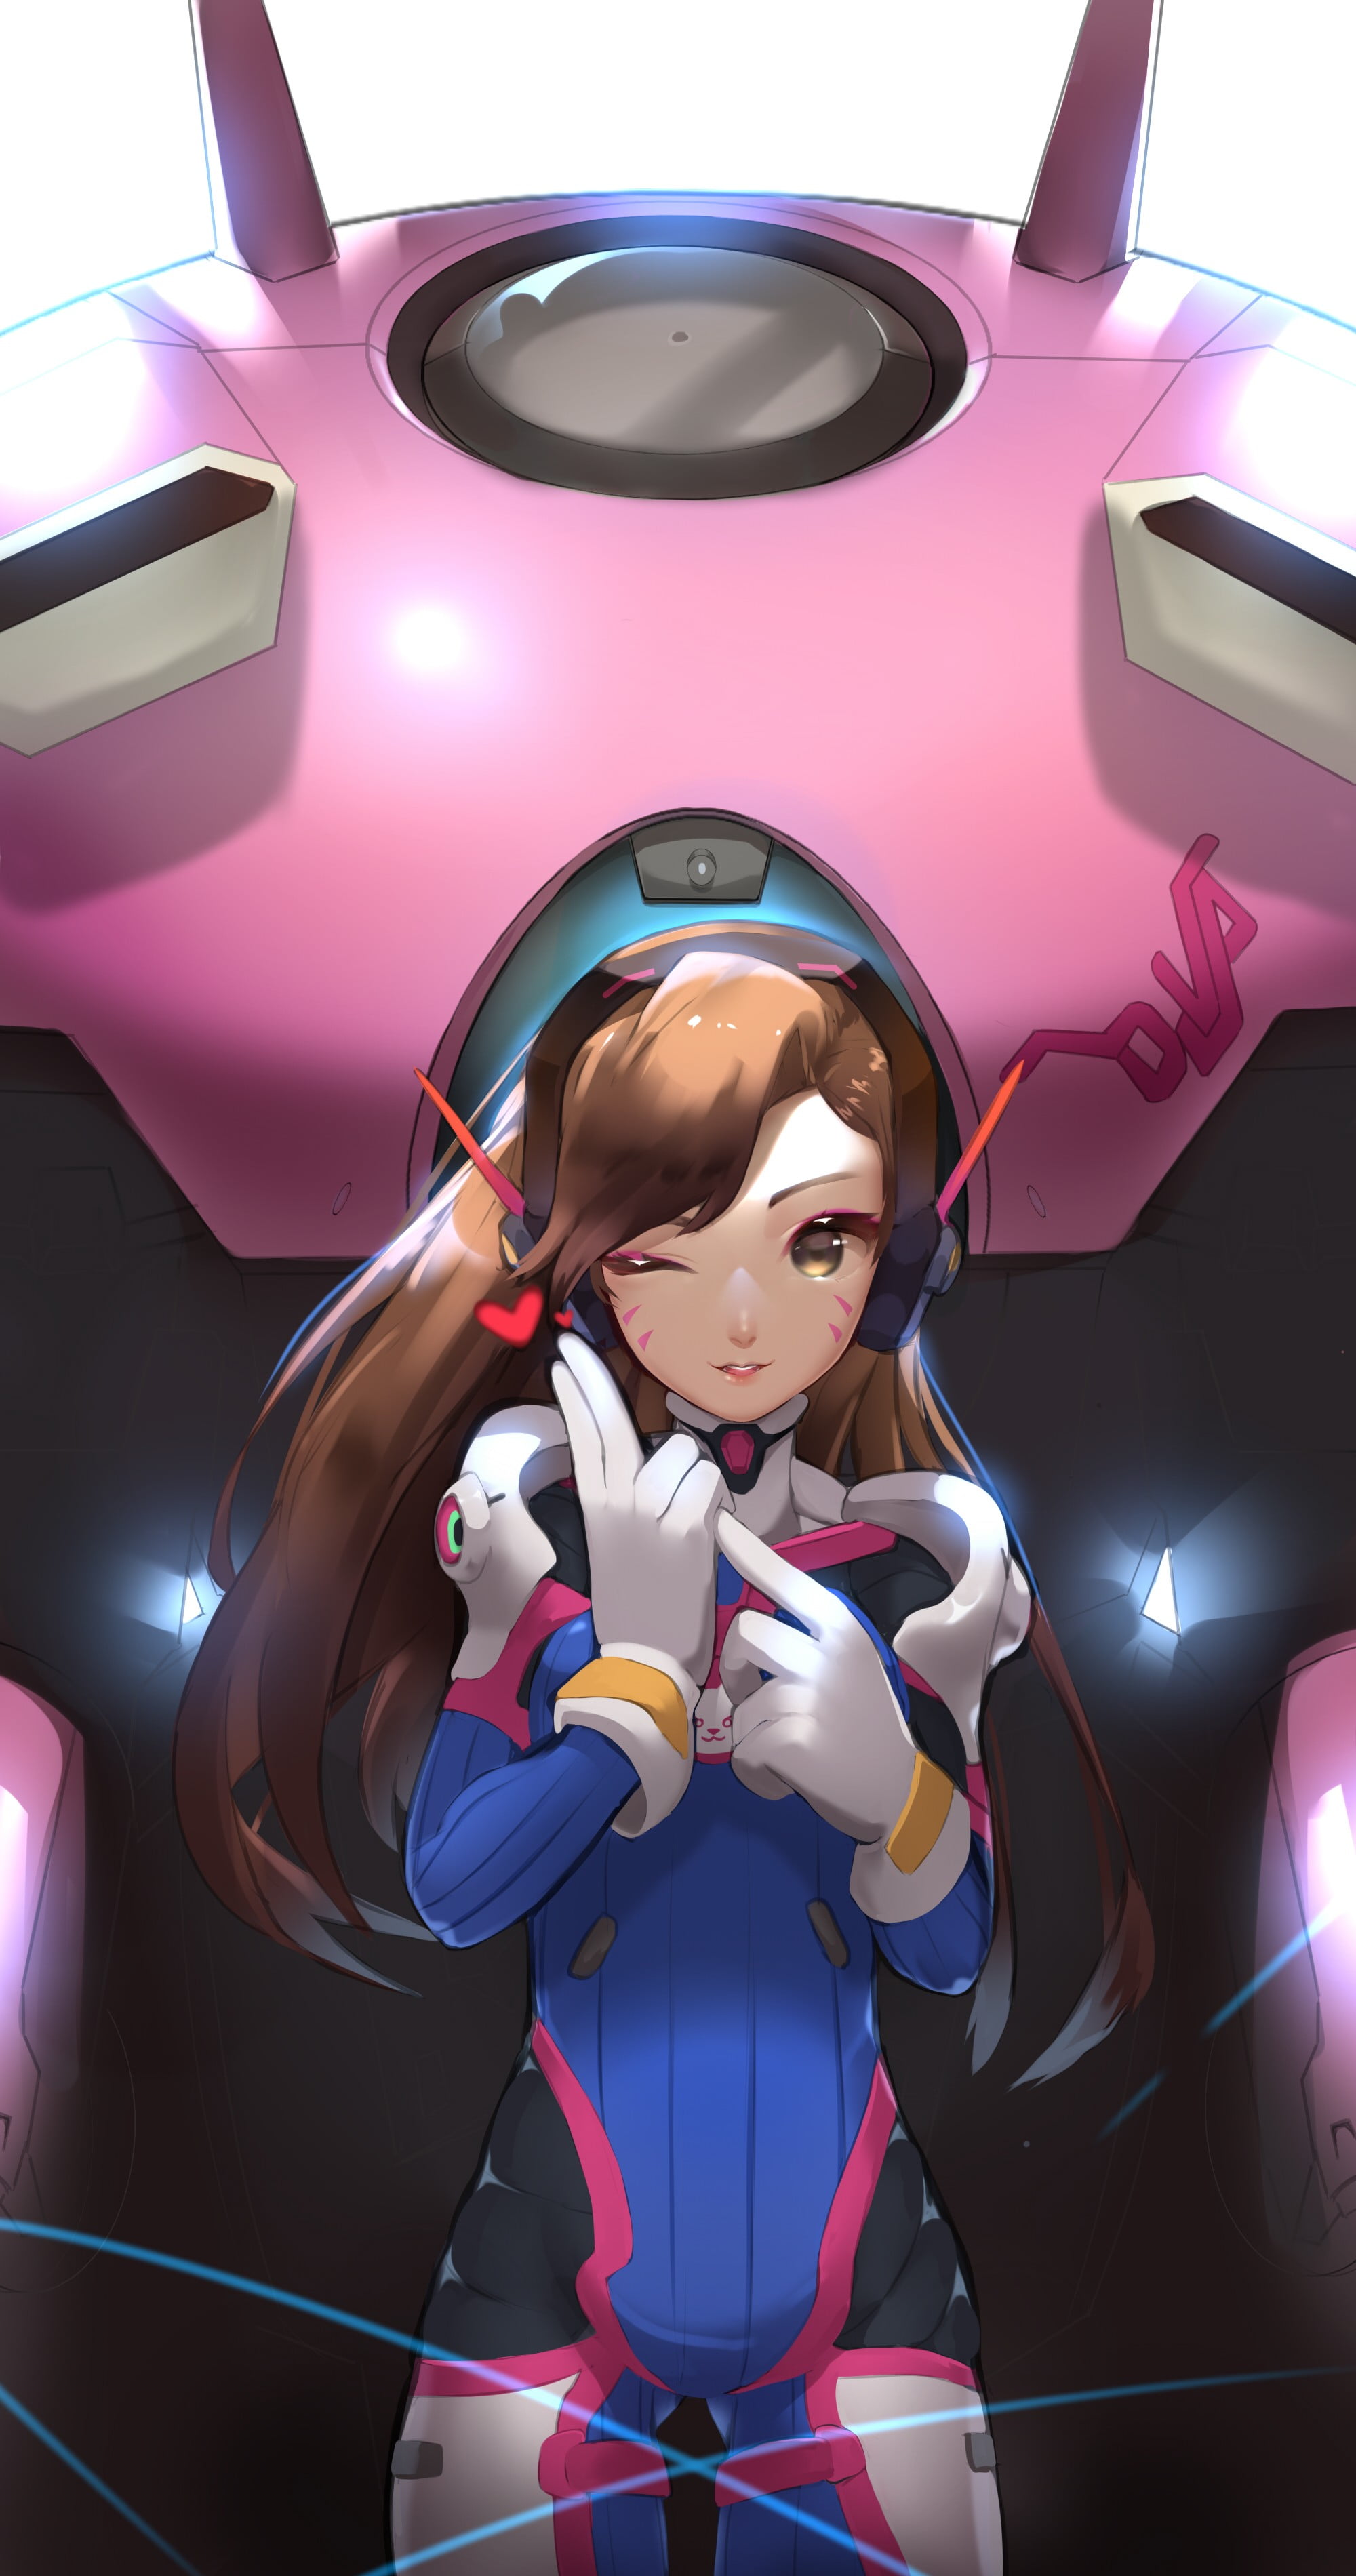 female anime character in white and pink top with gray headset